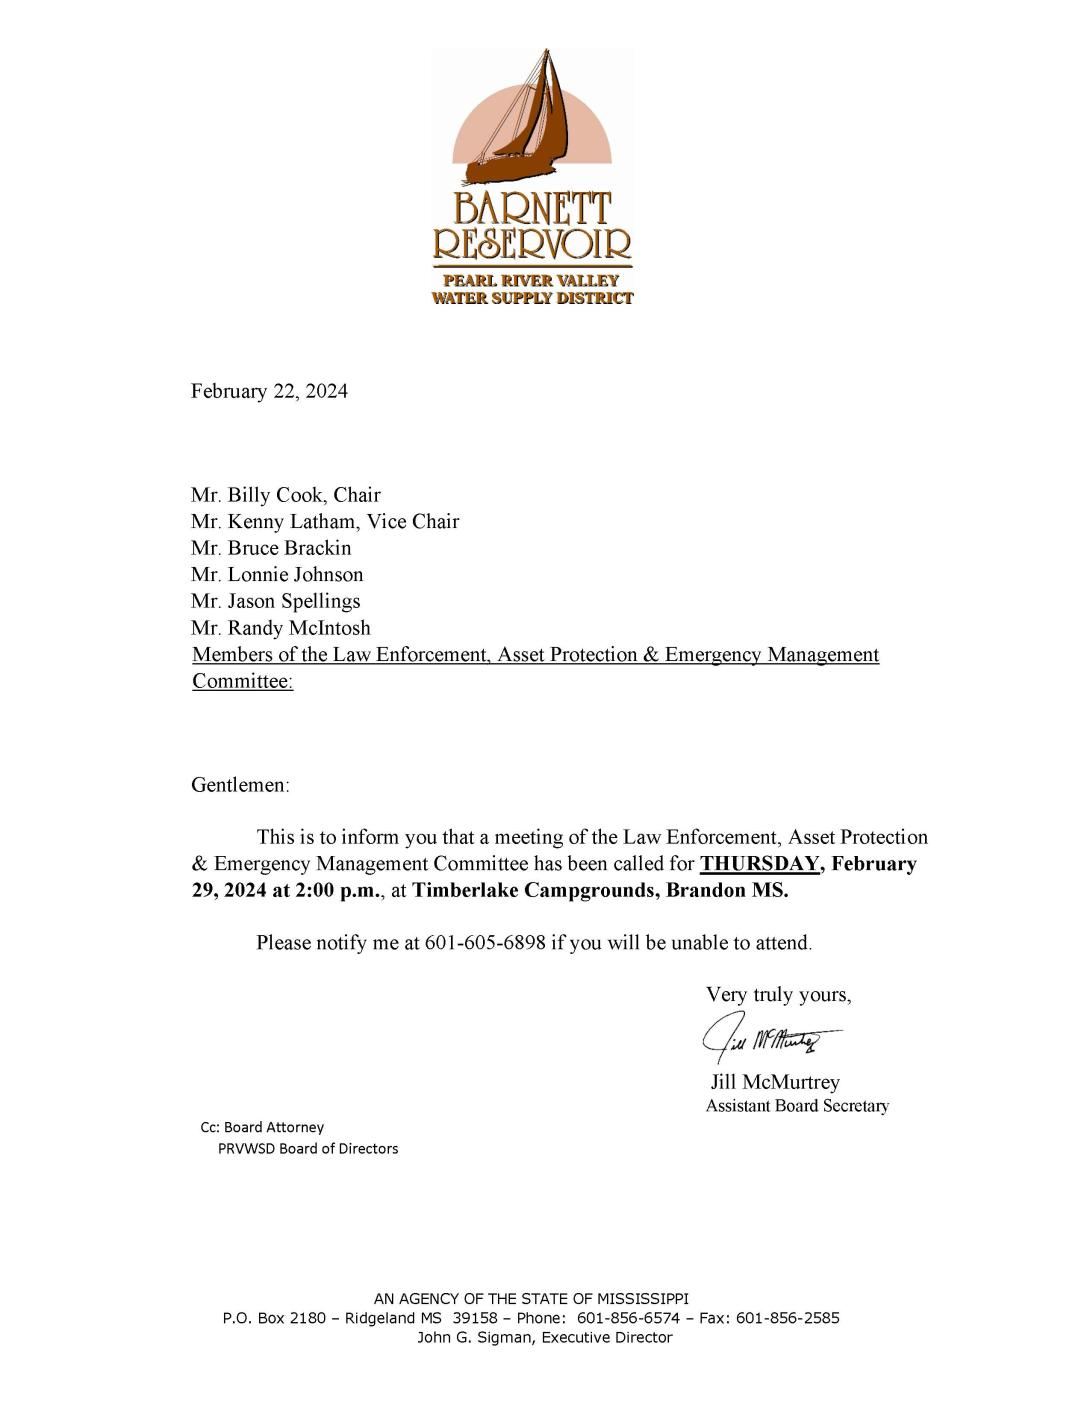 Call Letter for February 2024 Law Enforcement Committee Meeting